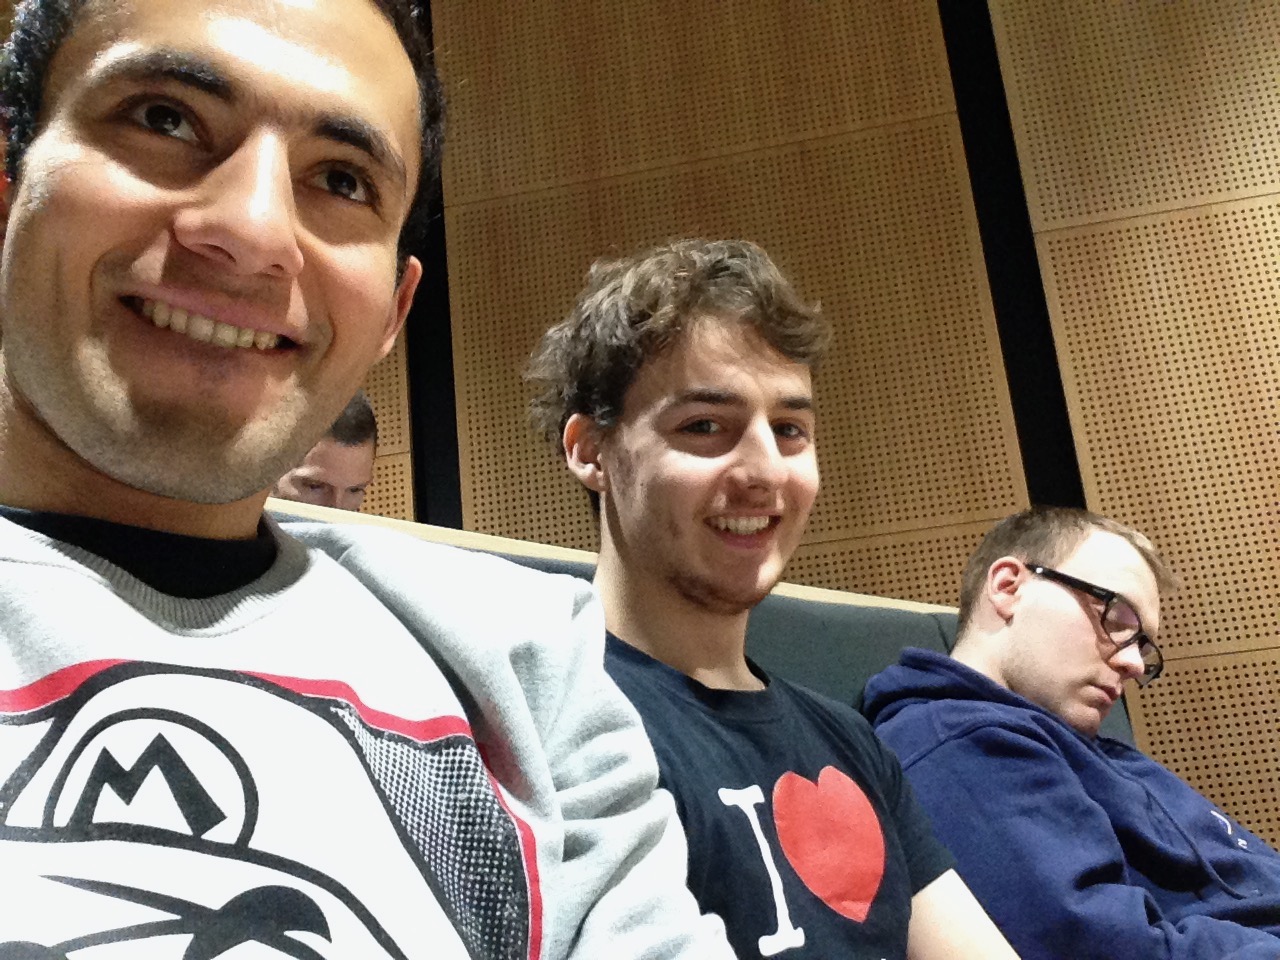 Joe, Ross and Me at Oxford Maths Institute in 2014